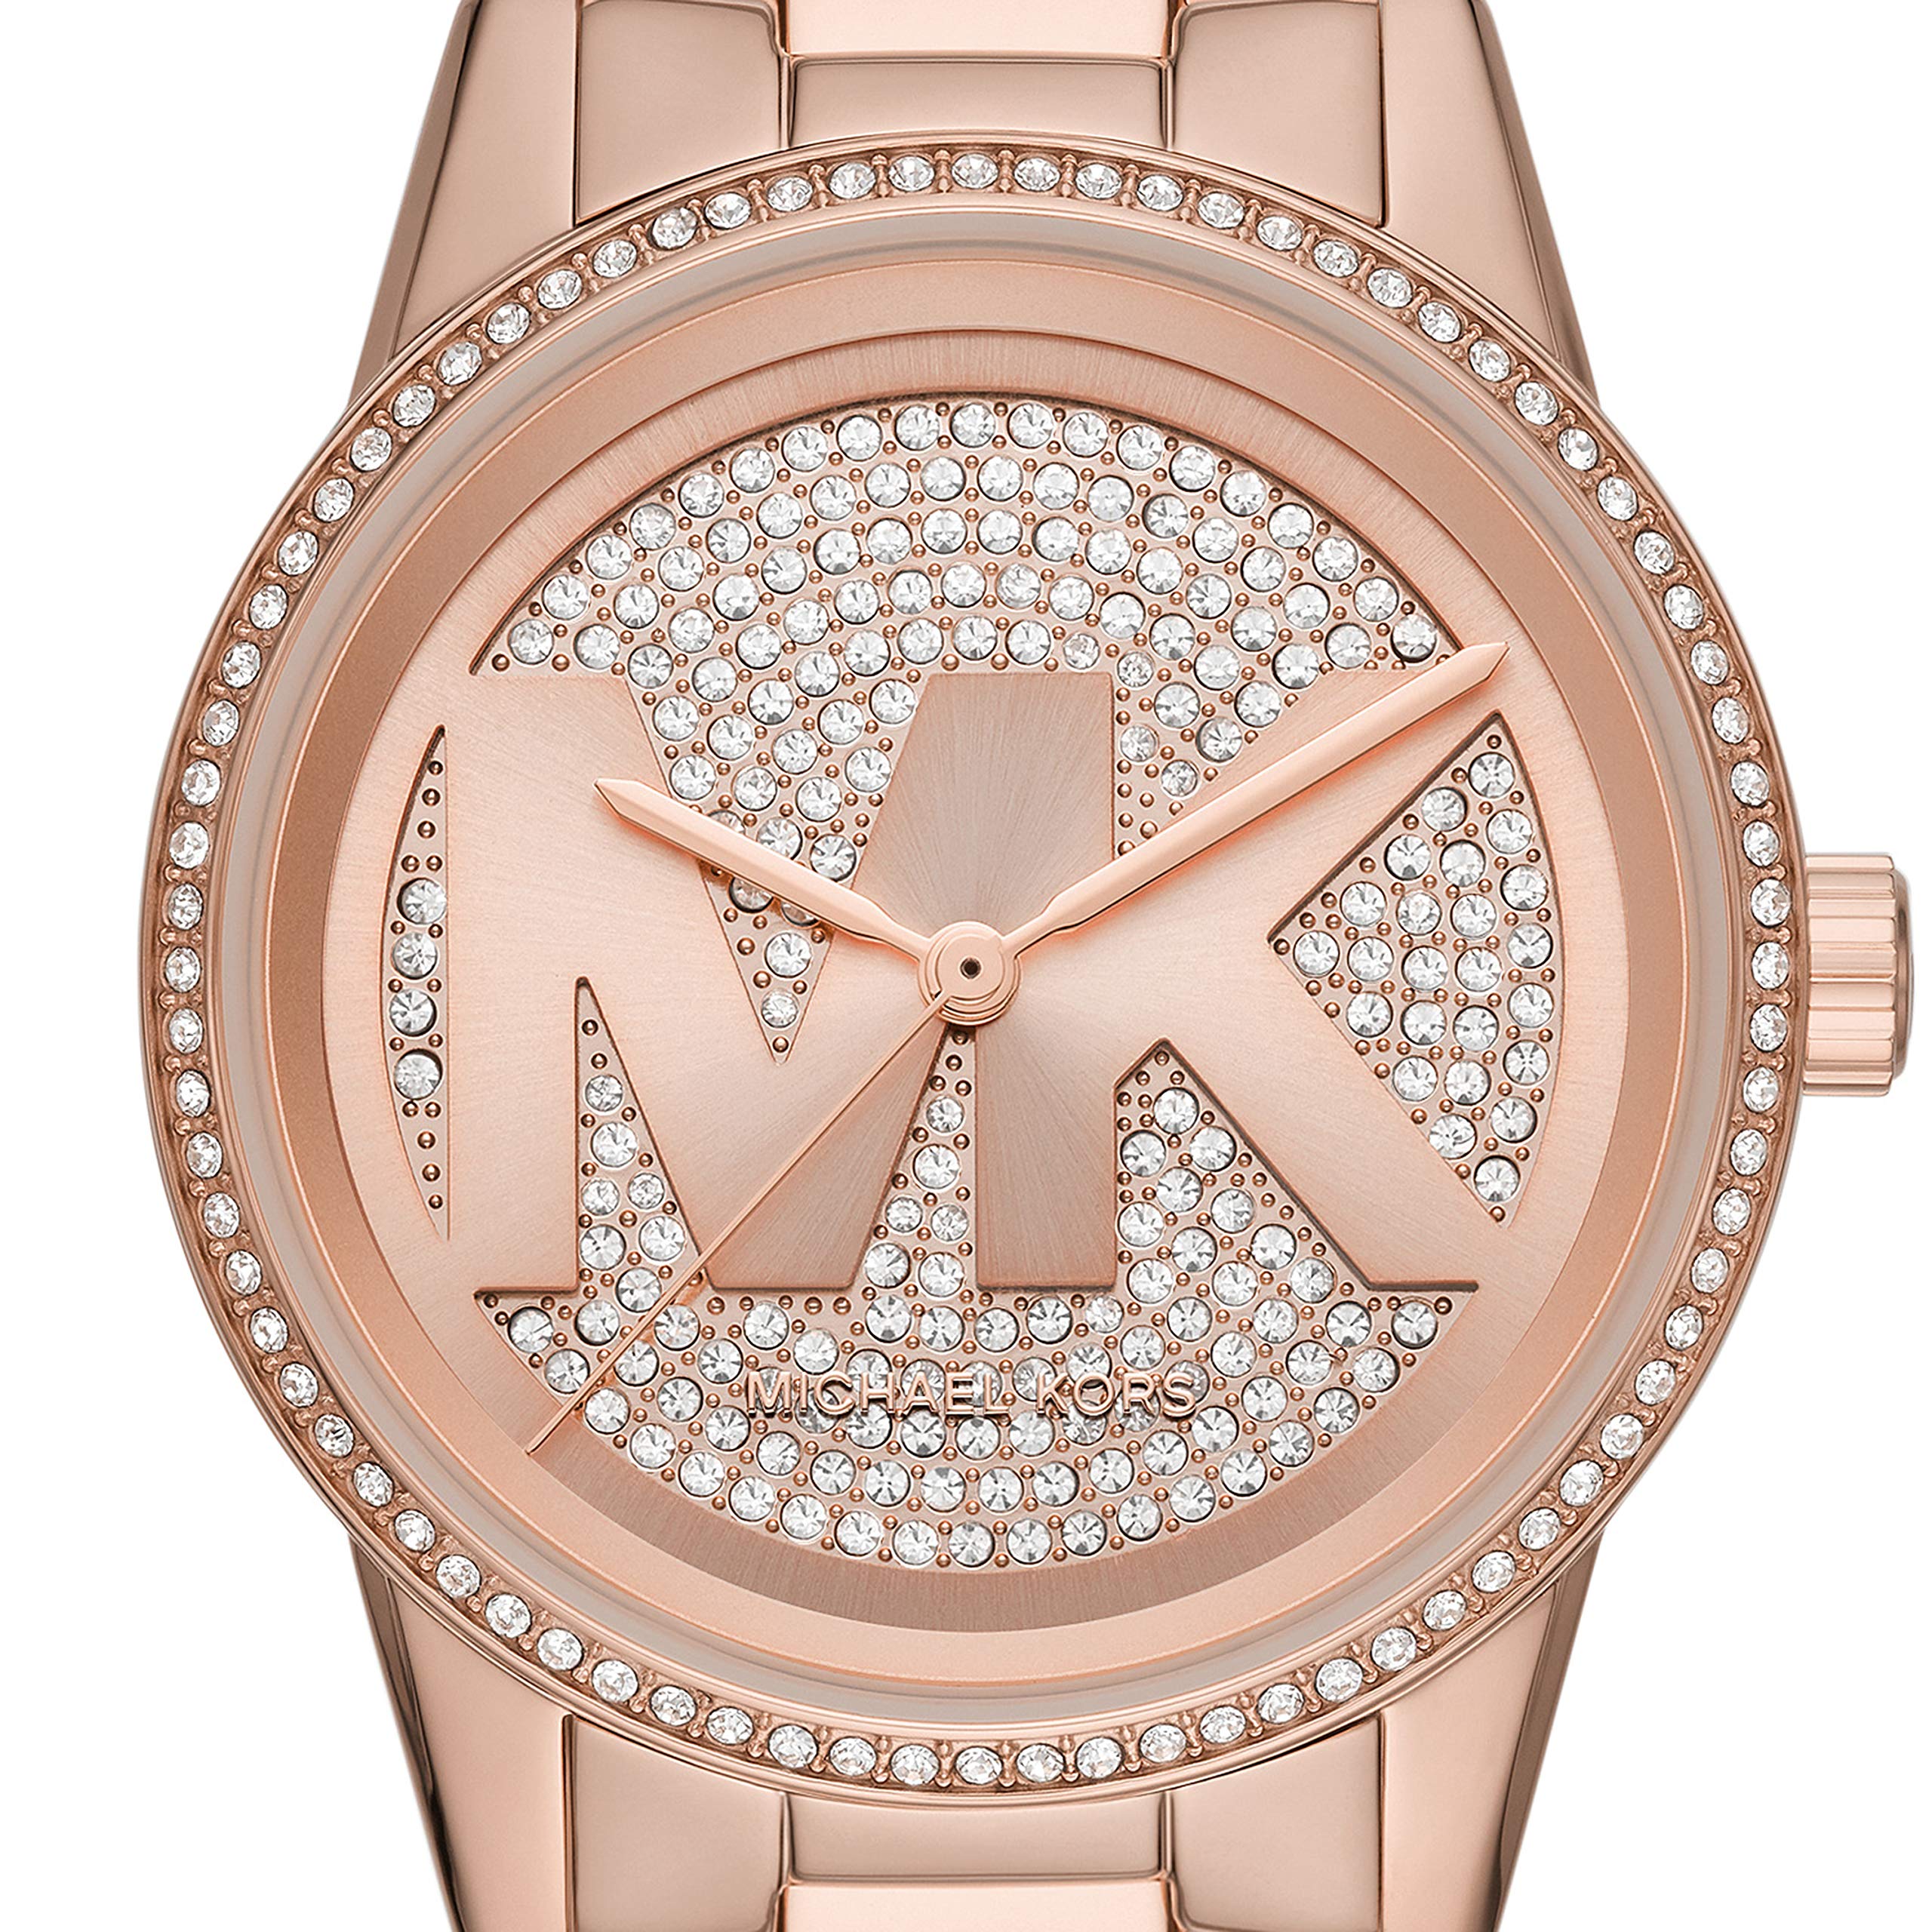 Michael Kors Women's Ritz Stainless Steel Watch With Crystal Topring